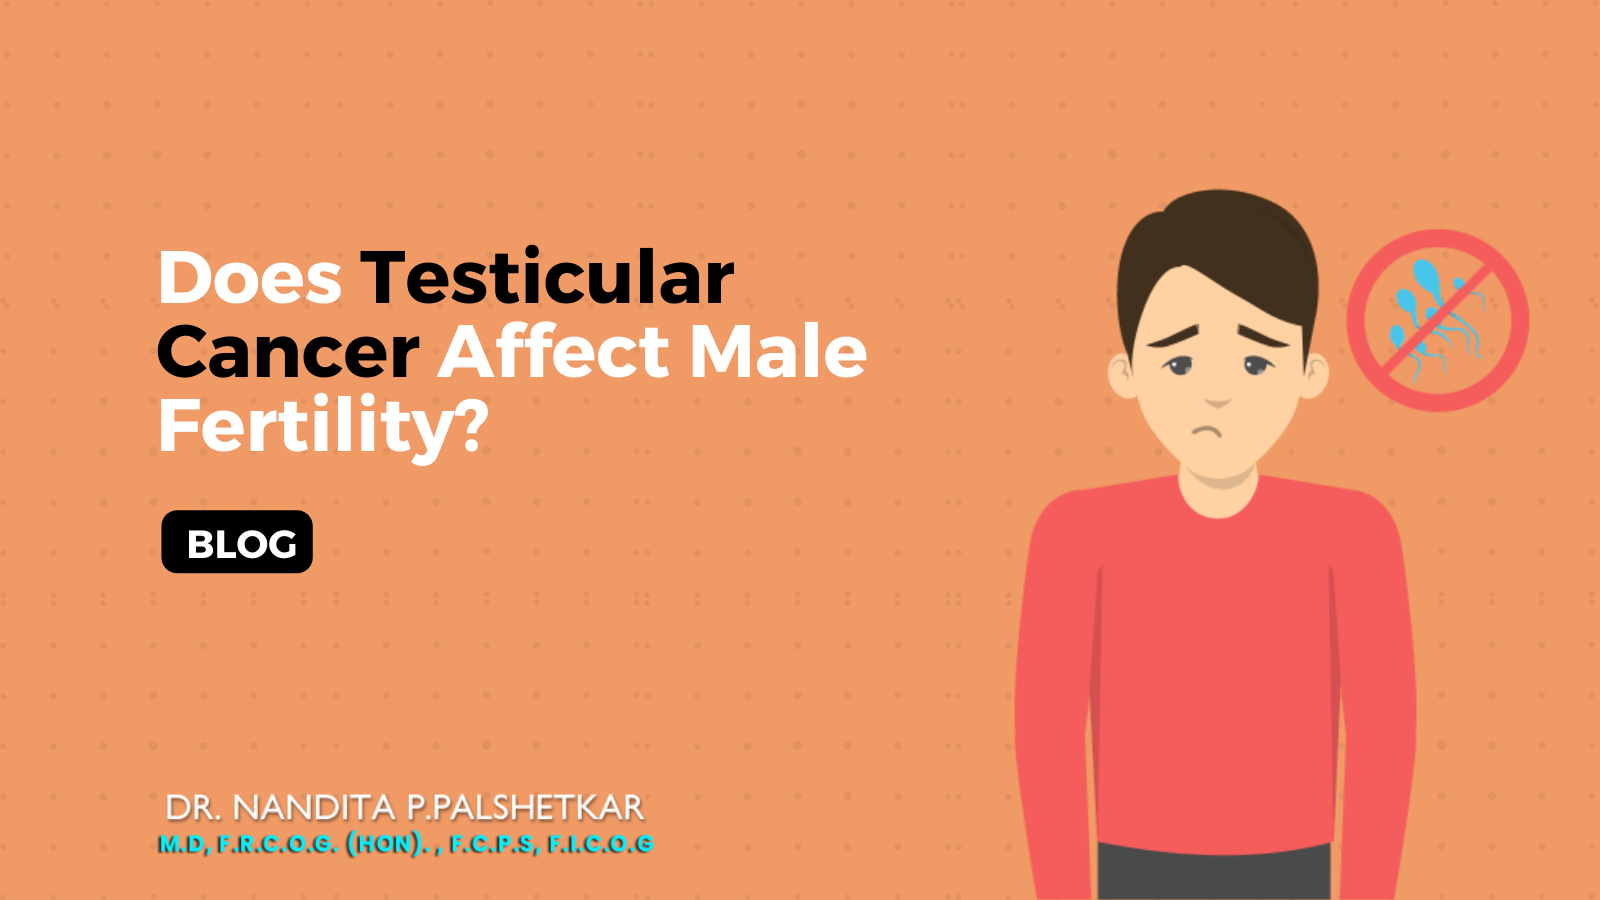 Does Testicular Cancer Affect Male Fertility?